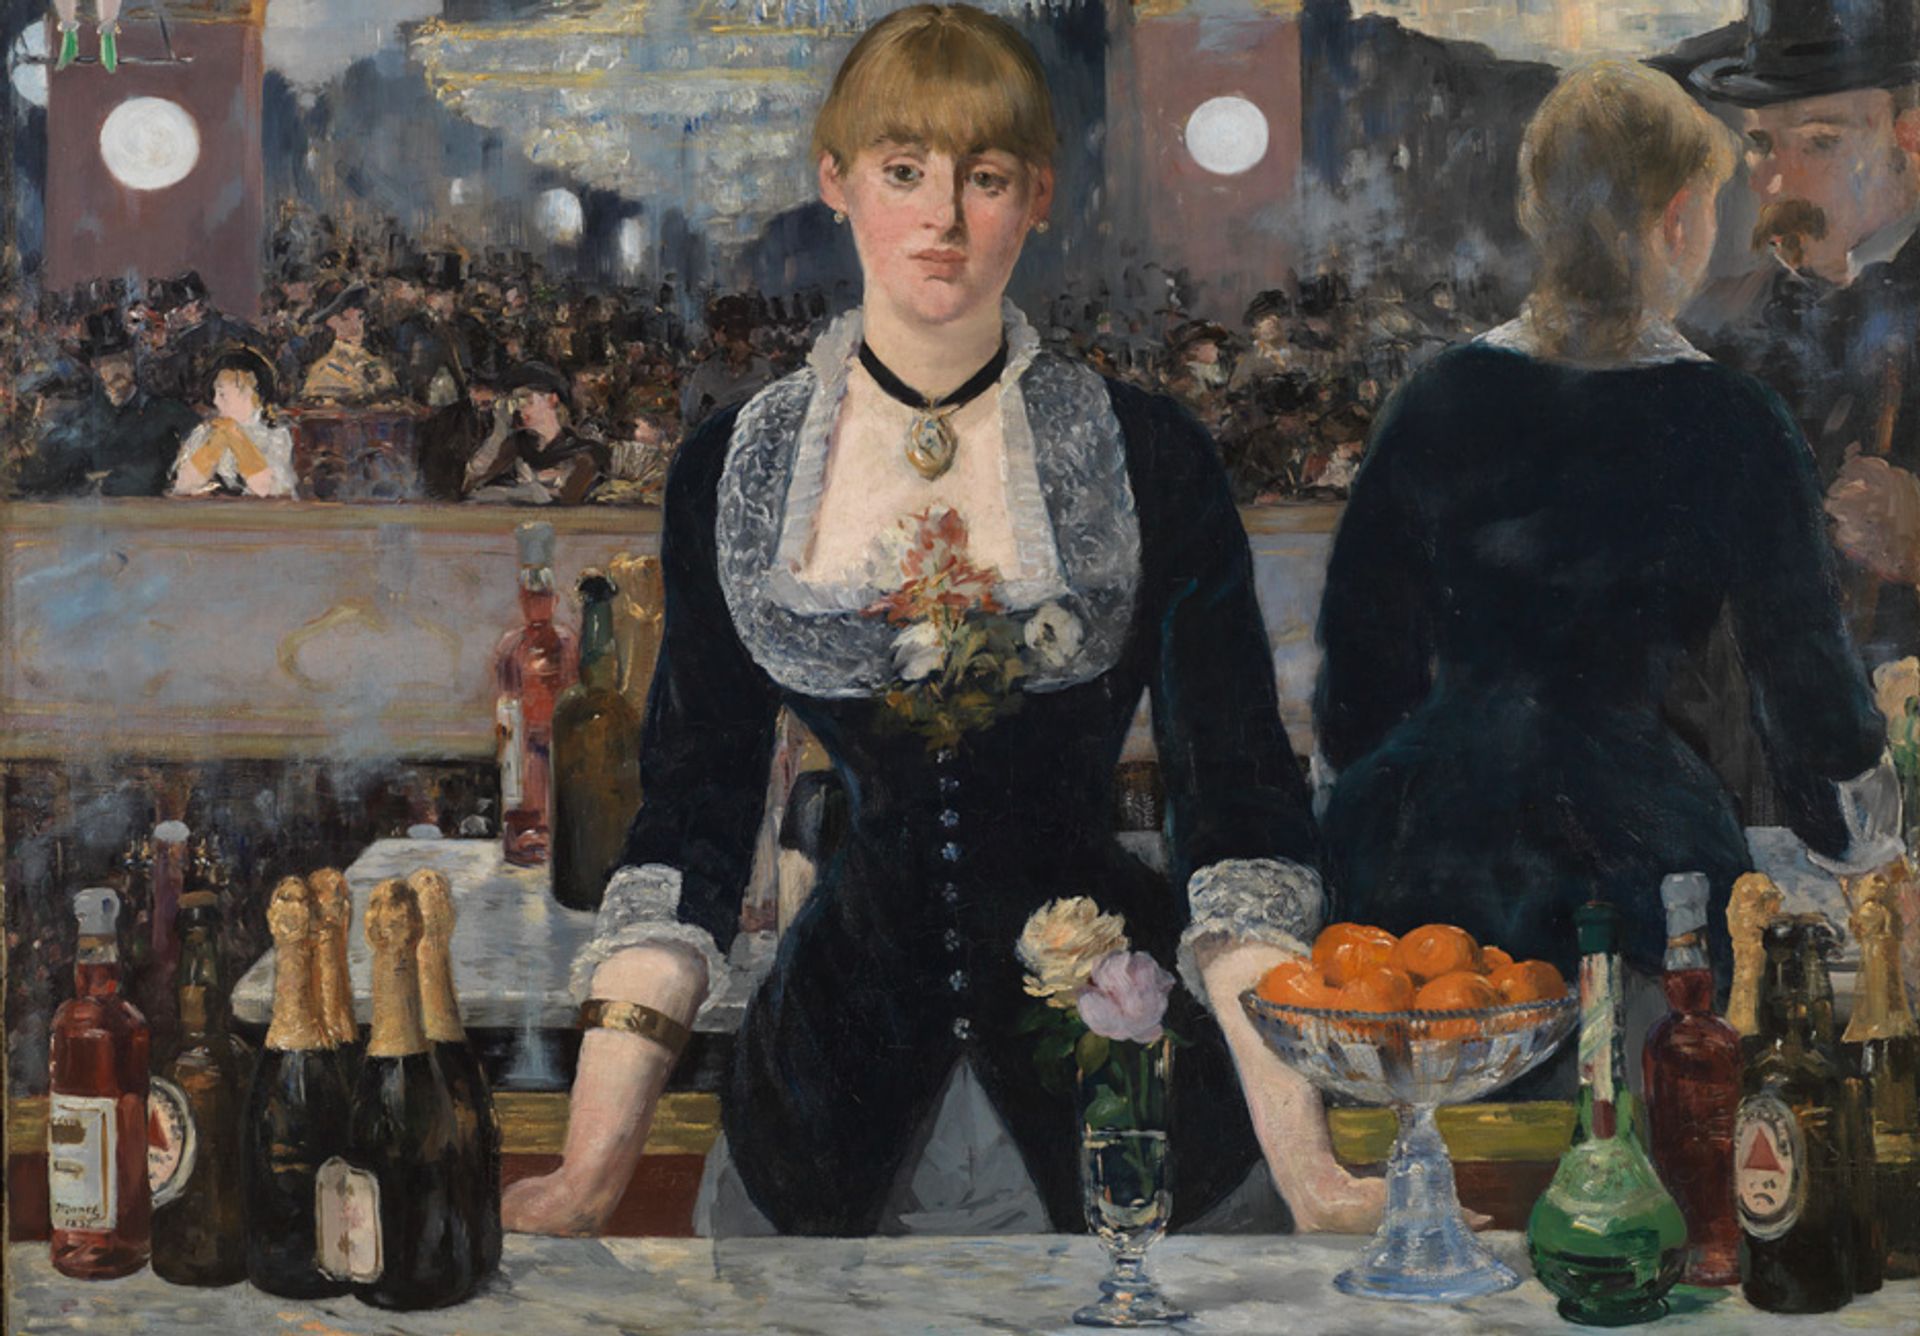 Edouard Manet's A Bar at the Folies-Bergère (1882) is among the rare loans heading to Paris in February 2019 Courtauld Gallery (the Samuel Courtauld Trust)